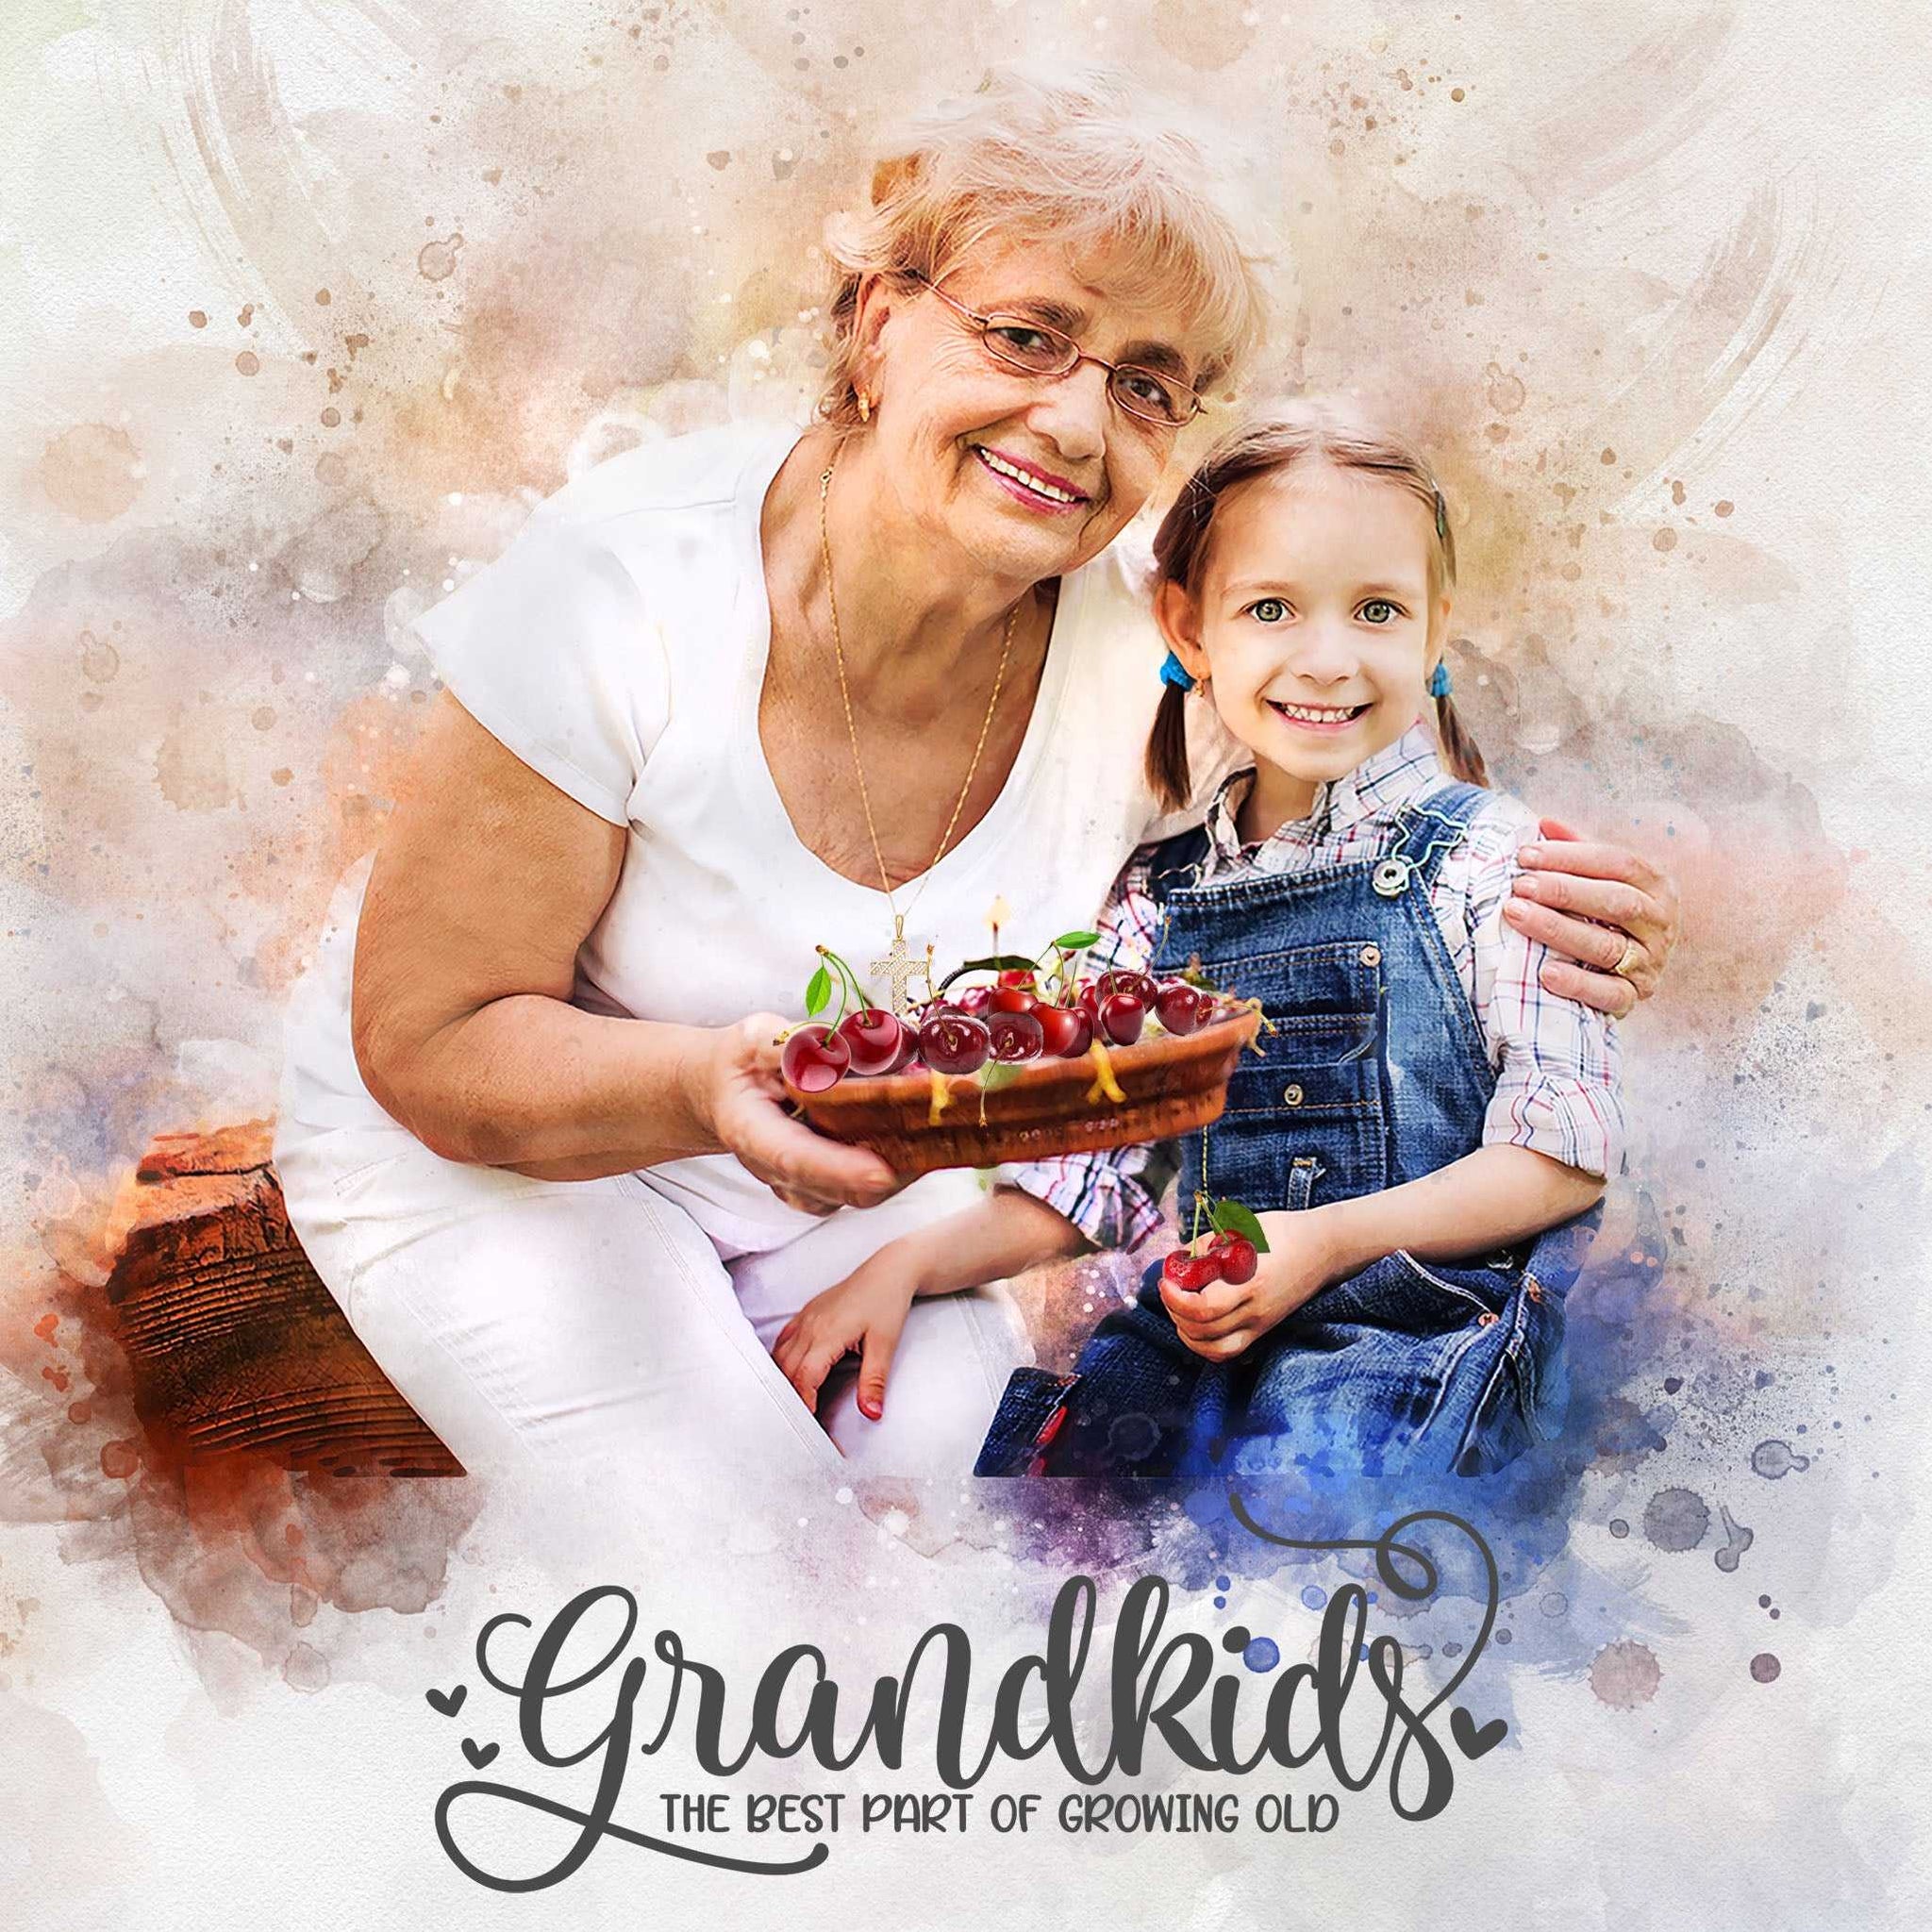 Christmas Gifts for Grandma | Gifts for Grandmothers for Christmas | Christmas Gift Ideas for Mom |Christmas presents for Grandma - FromPicToArt